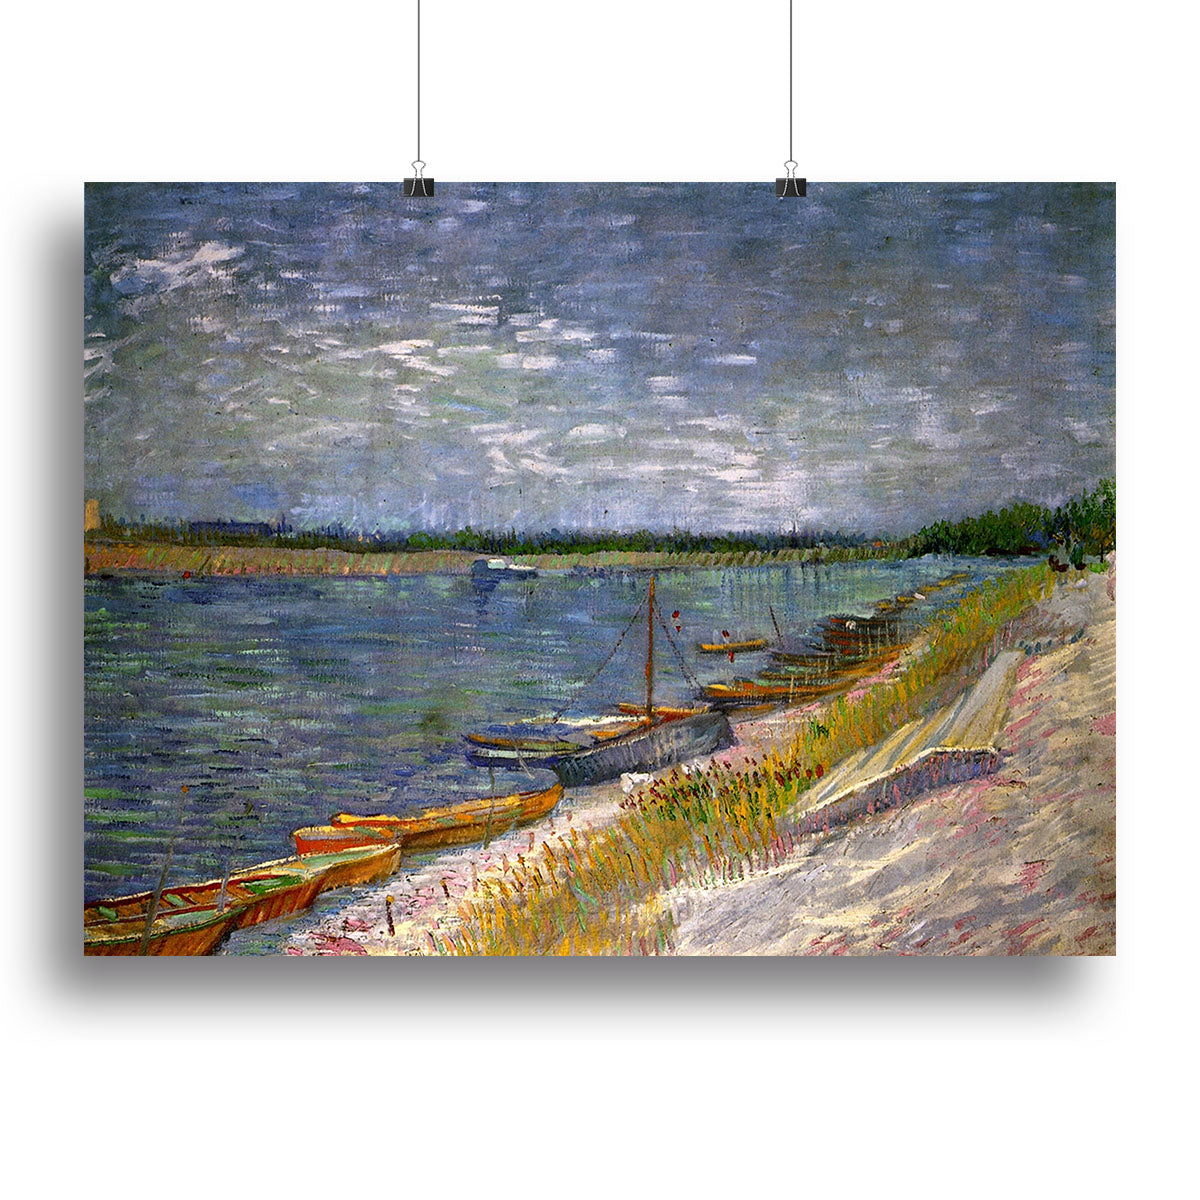 View of a River with Rowing Boats by Van Gogh Canvas Print or Poster - Canvas Art Rocks - 2